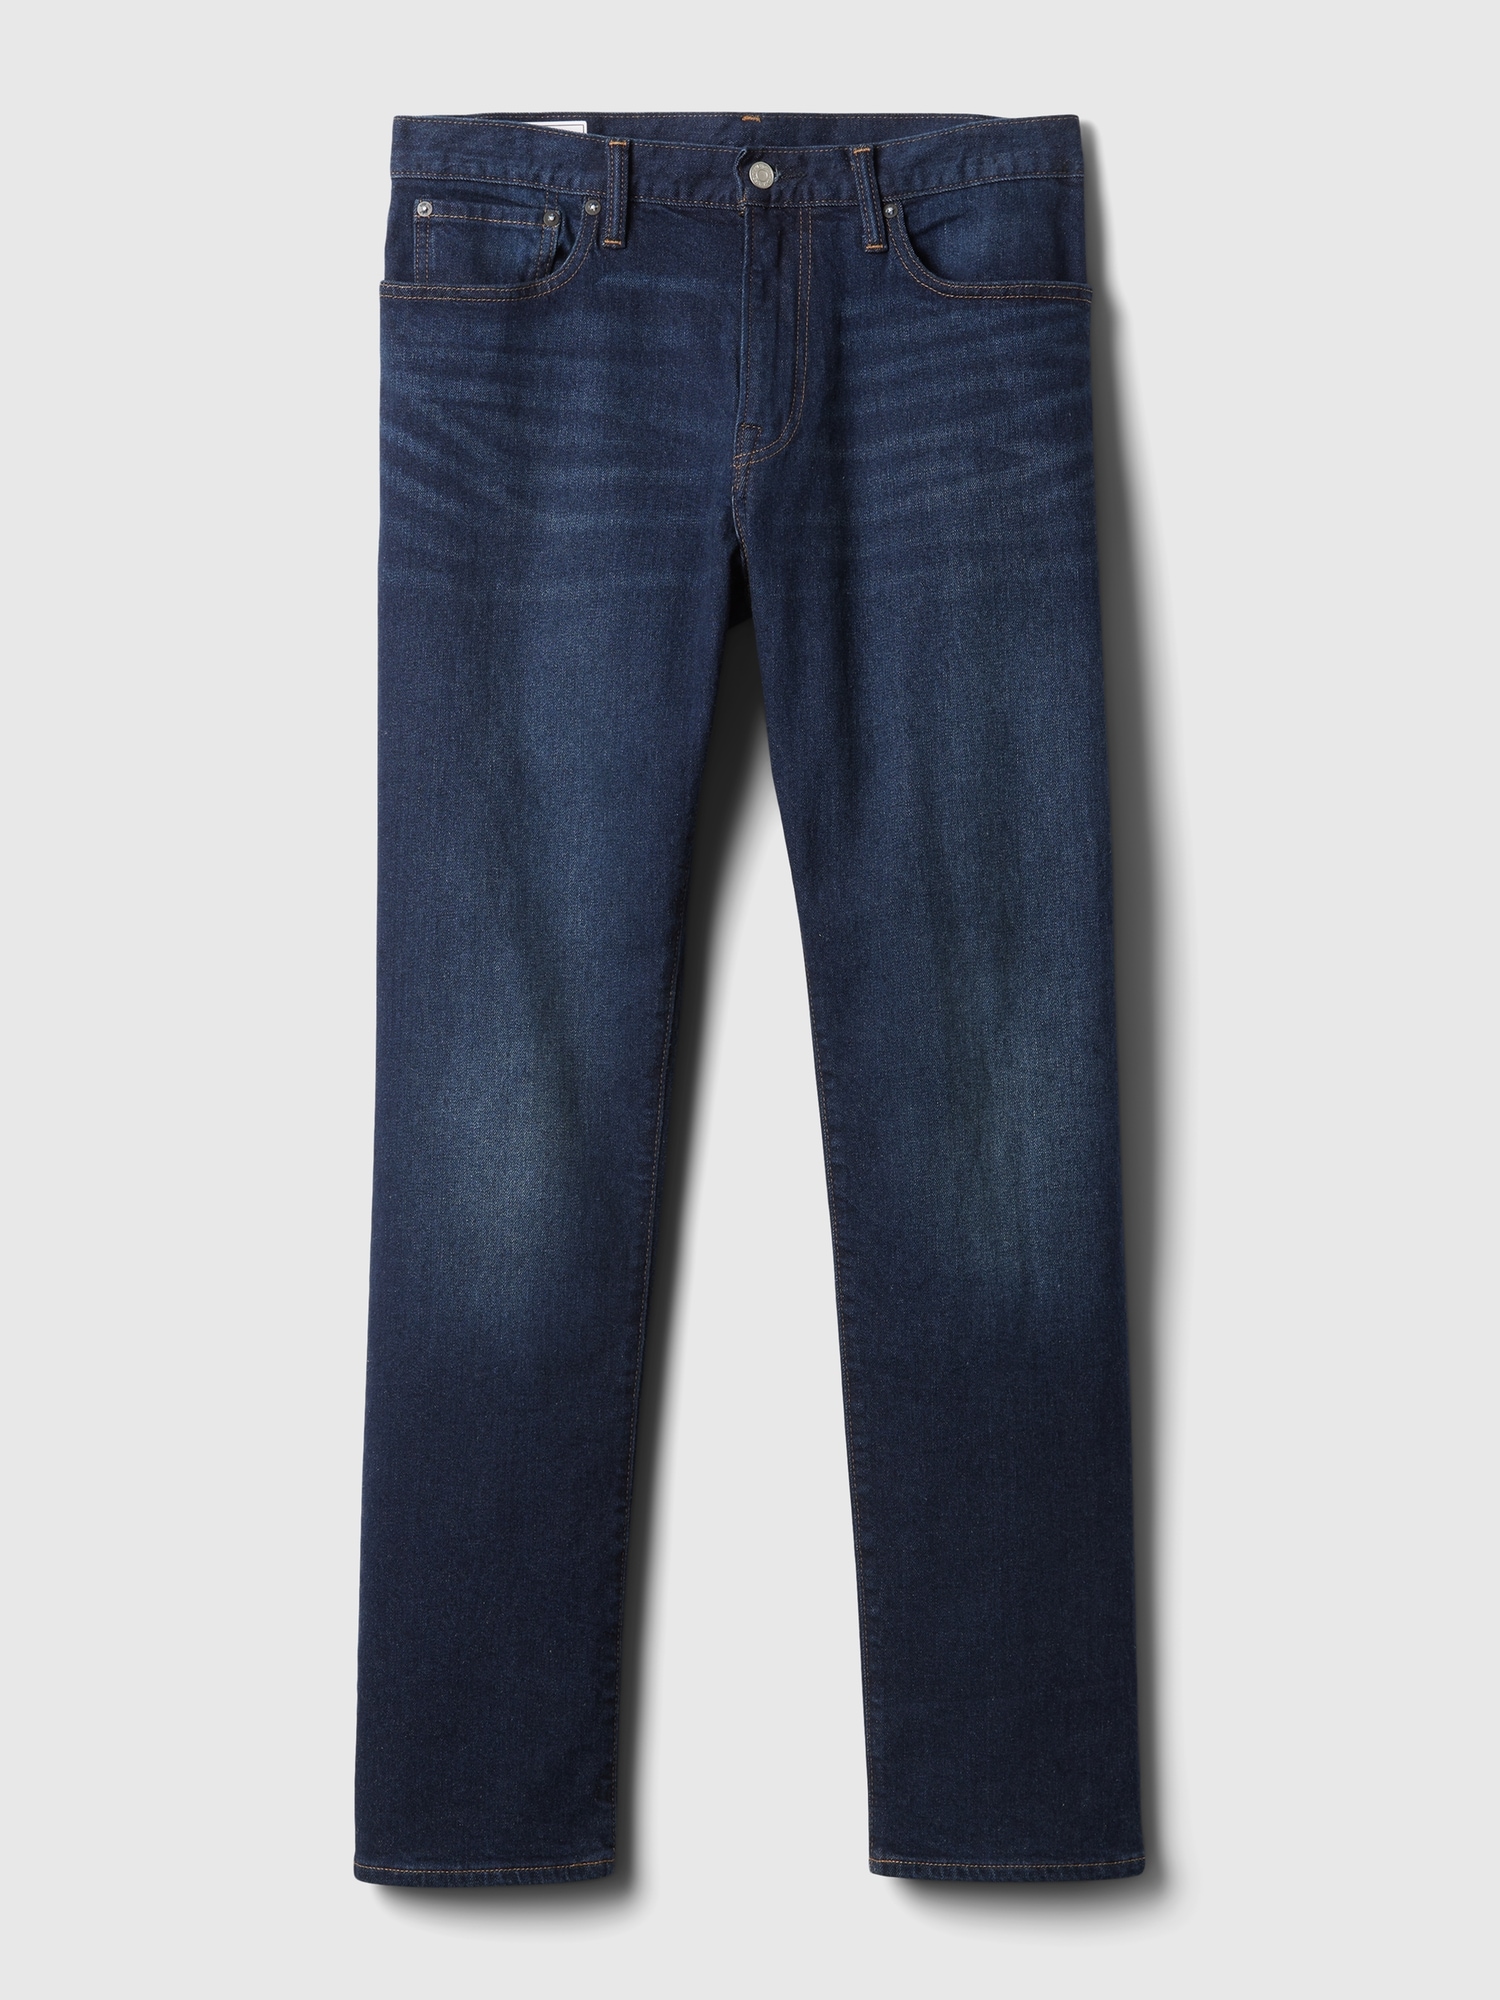 New Gap NAVY straight JEANS with Gapflex 30x34 garment dyed mens